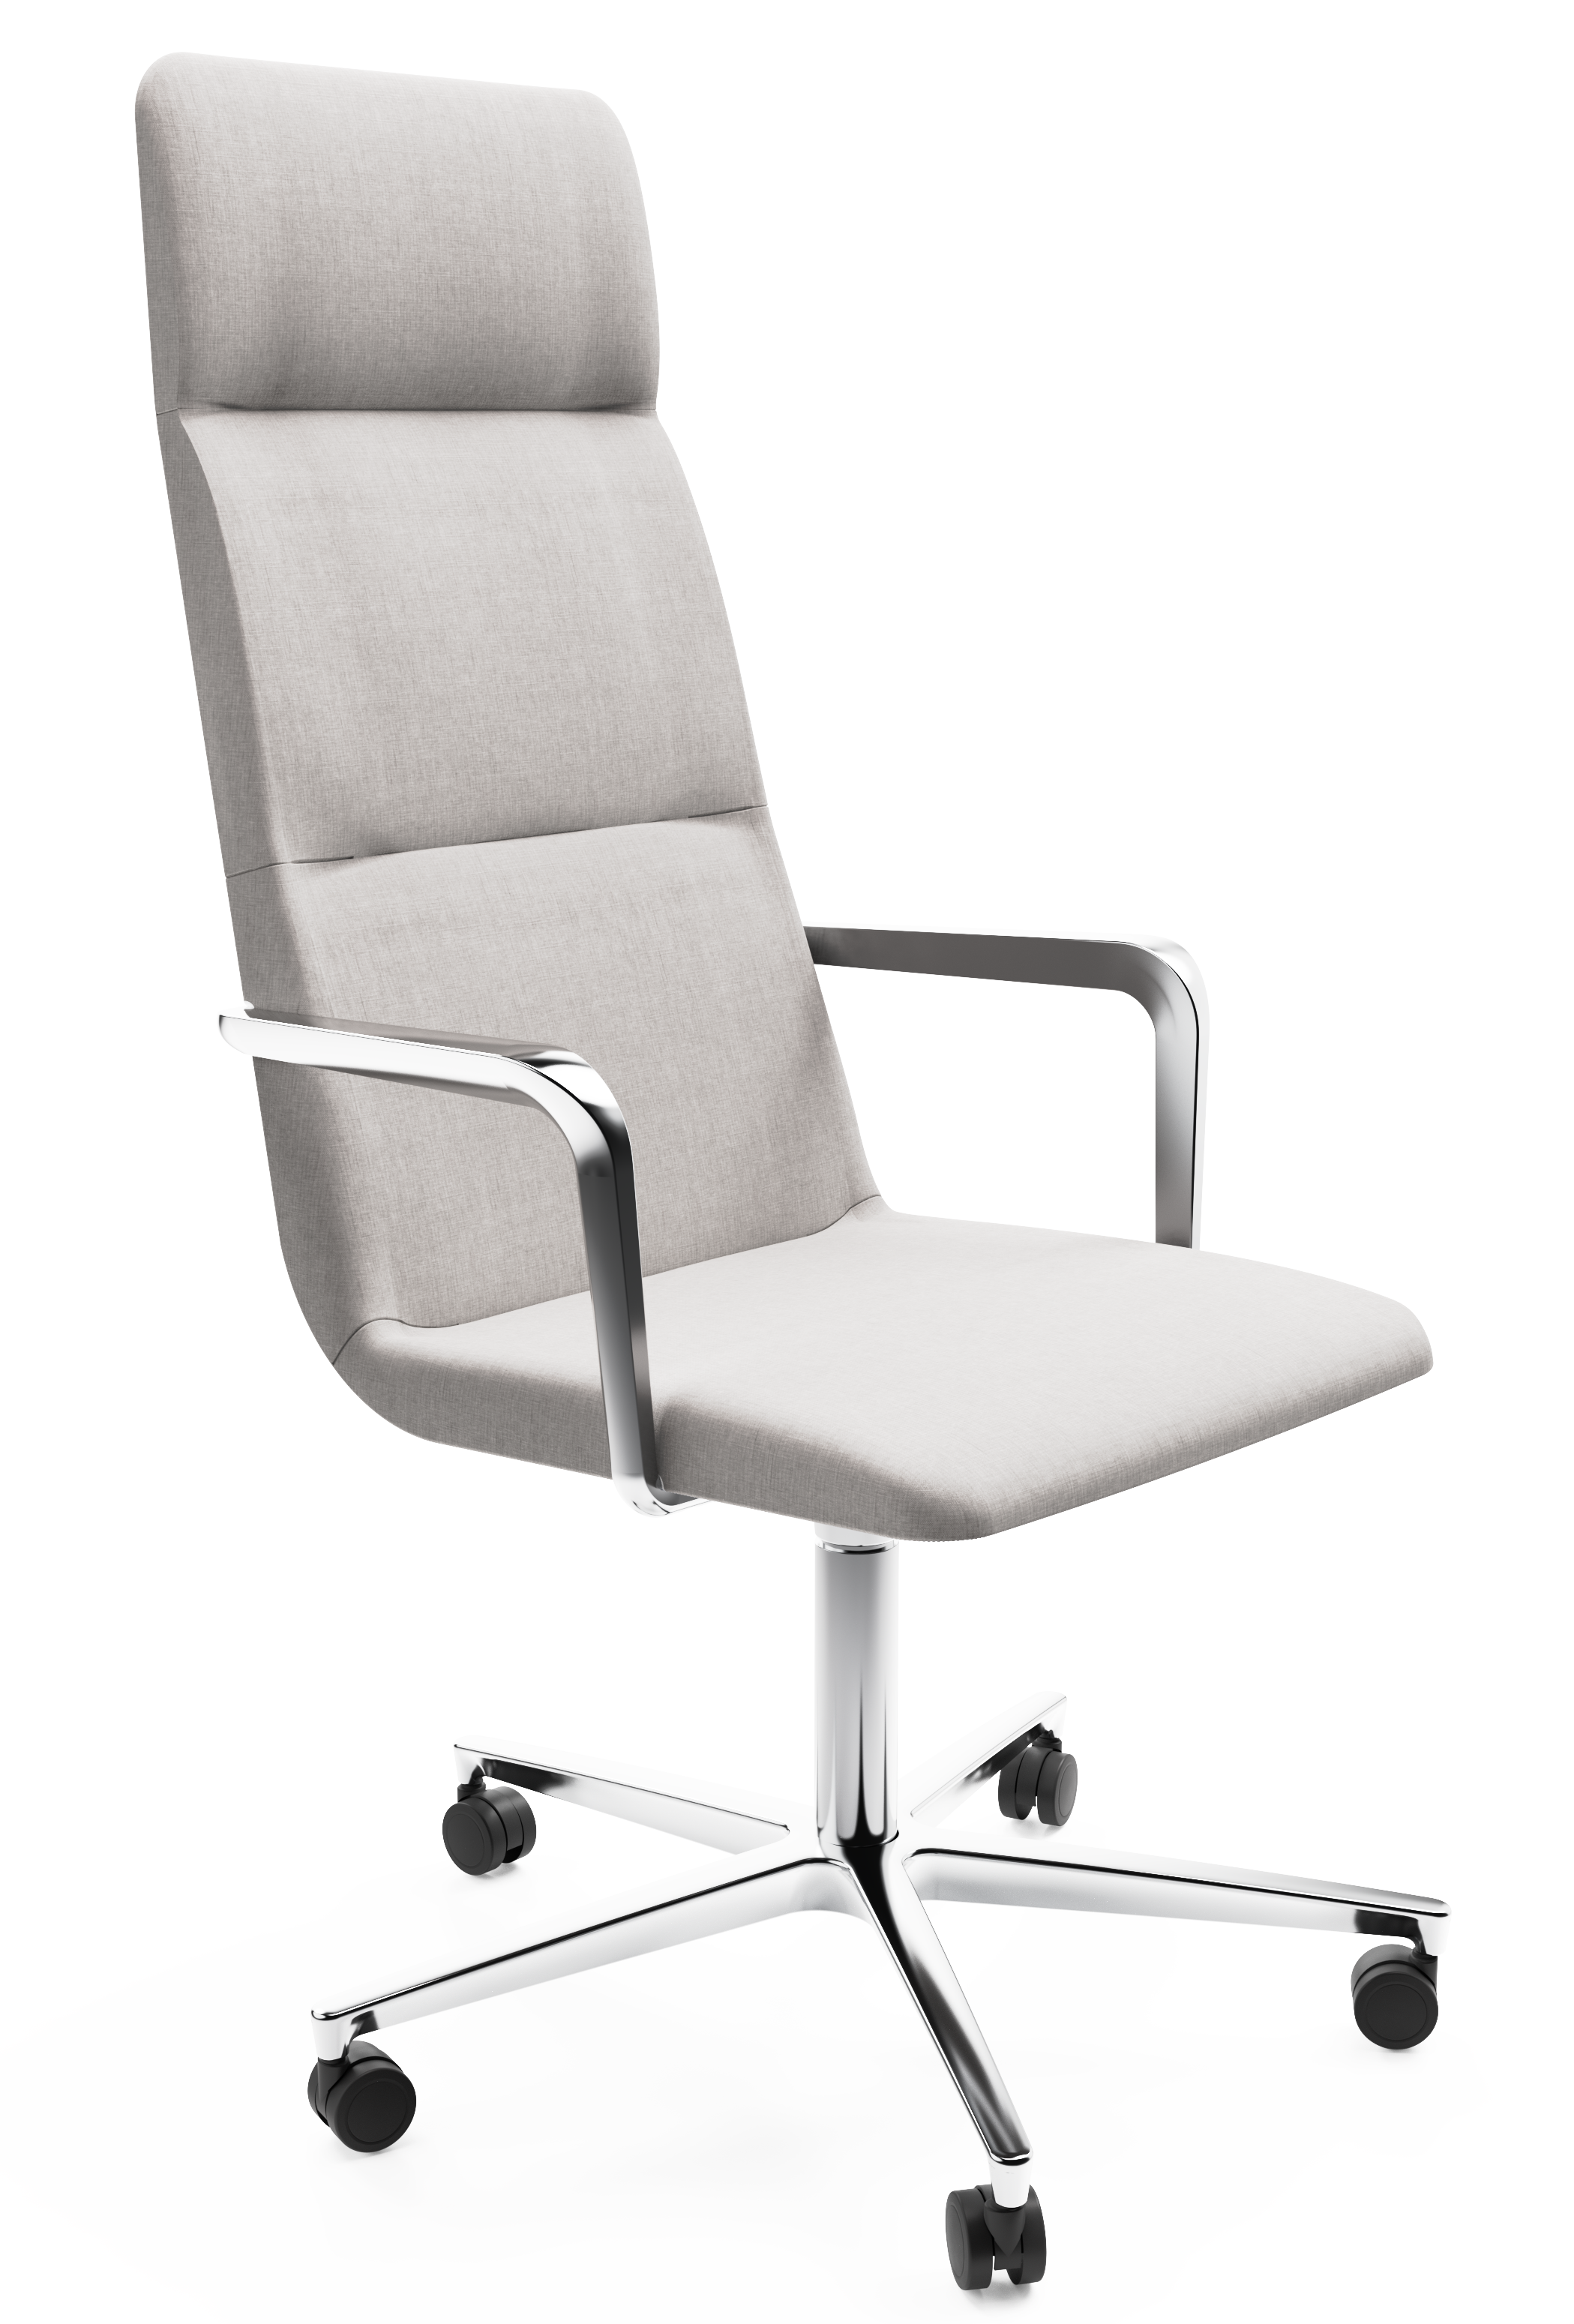 WS - Accord arms high 5 star base with castors chair - chrome - remix 126 - front angle